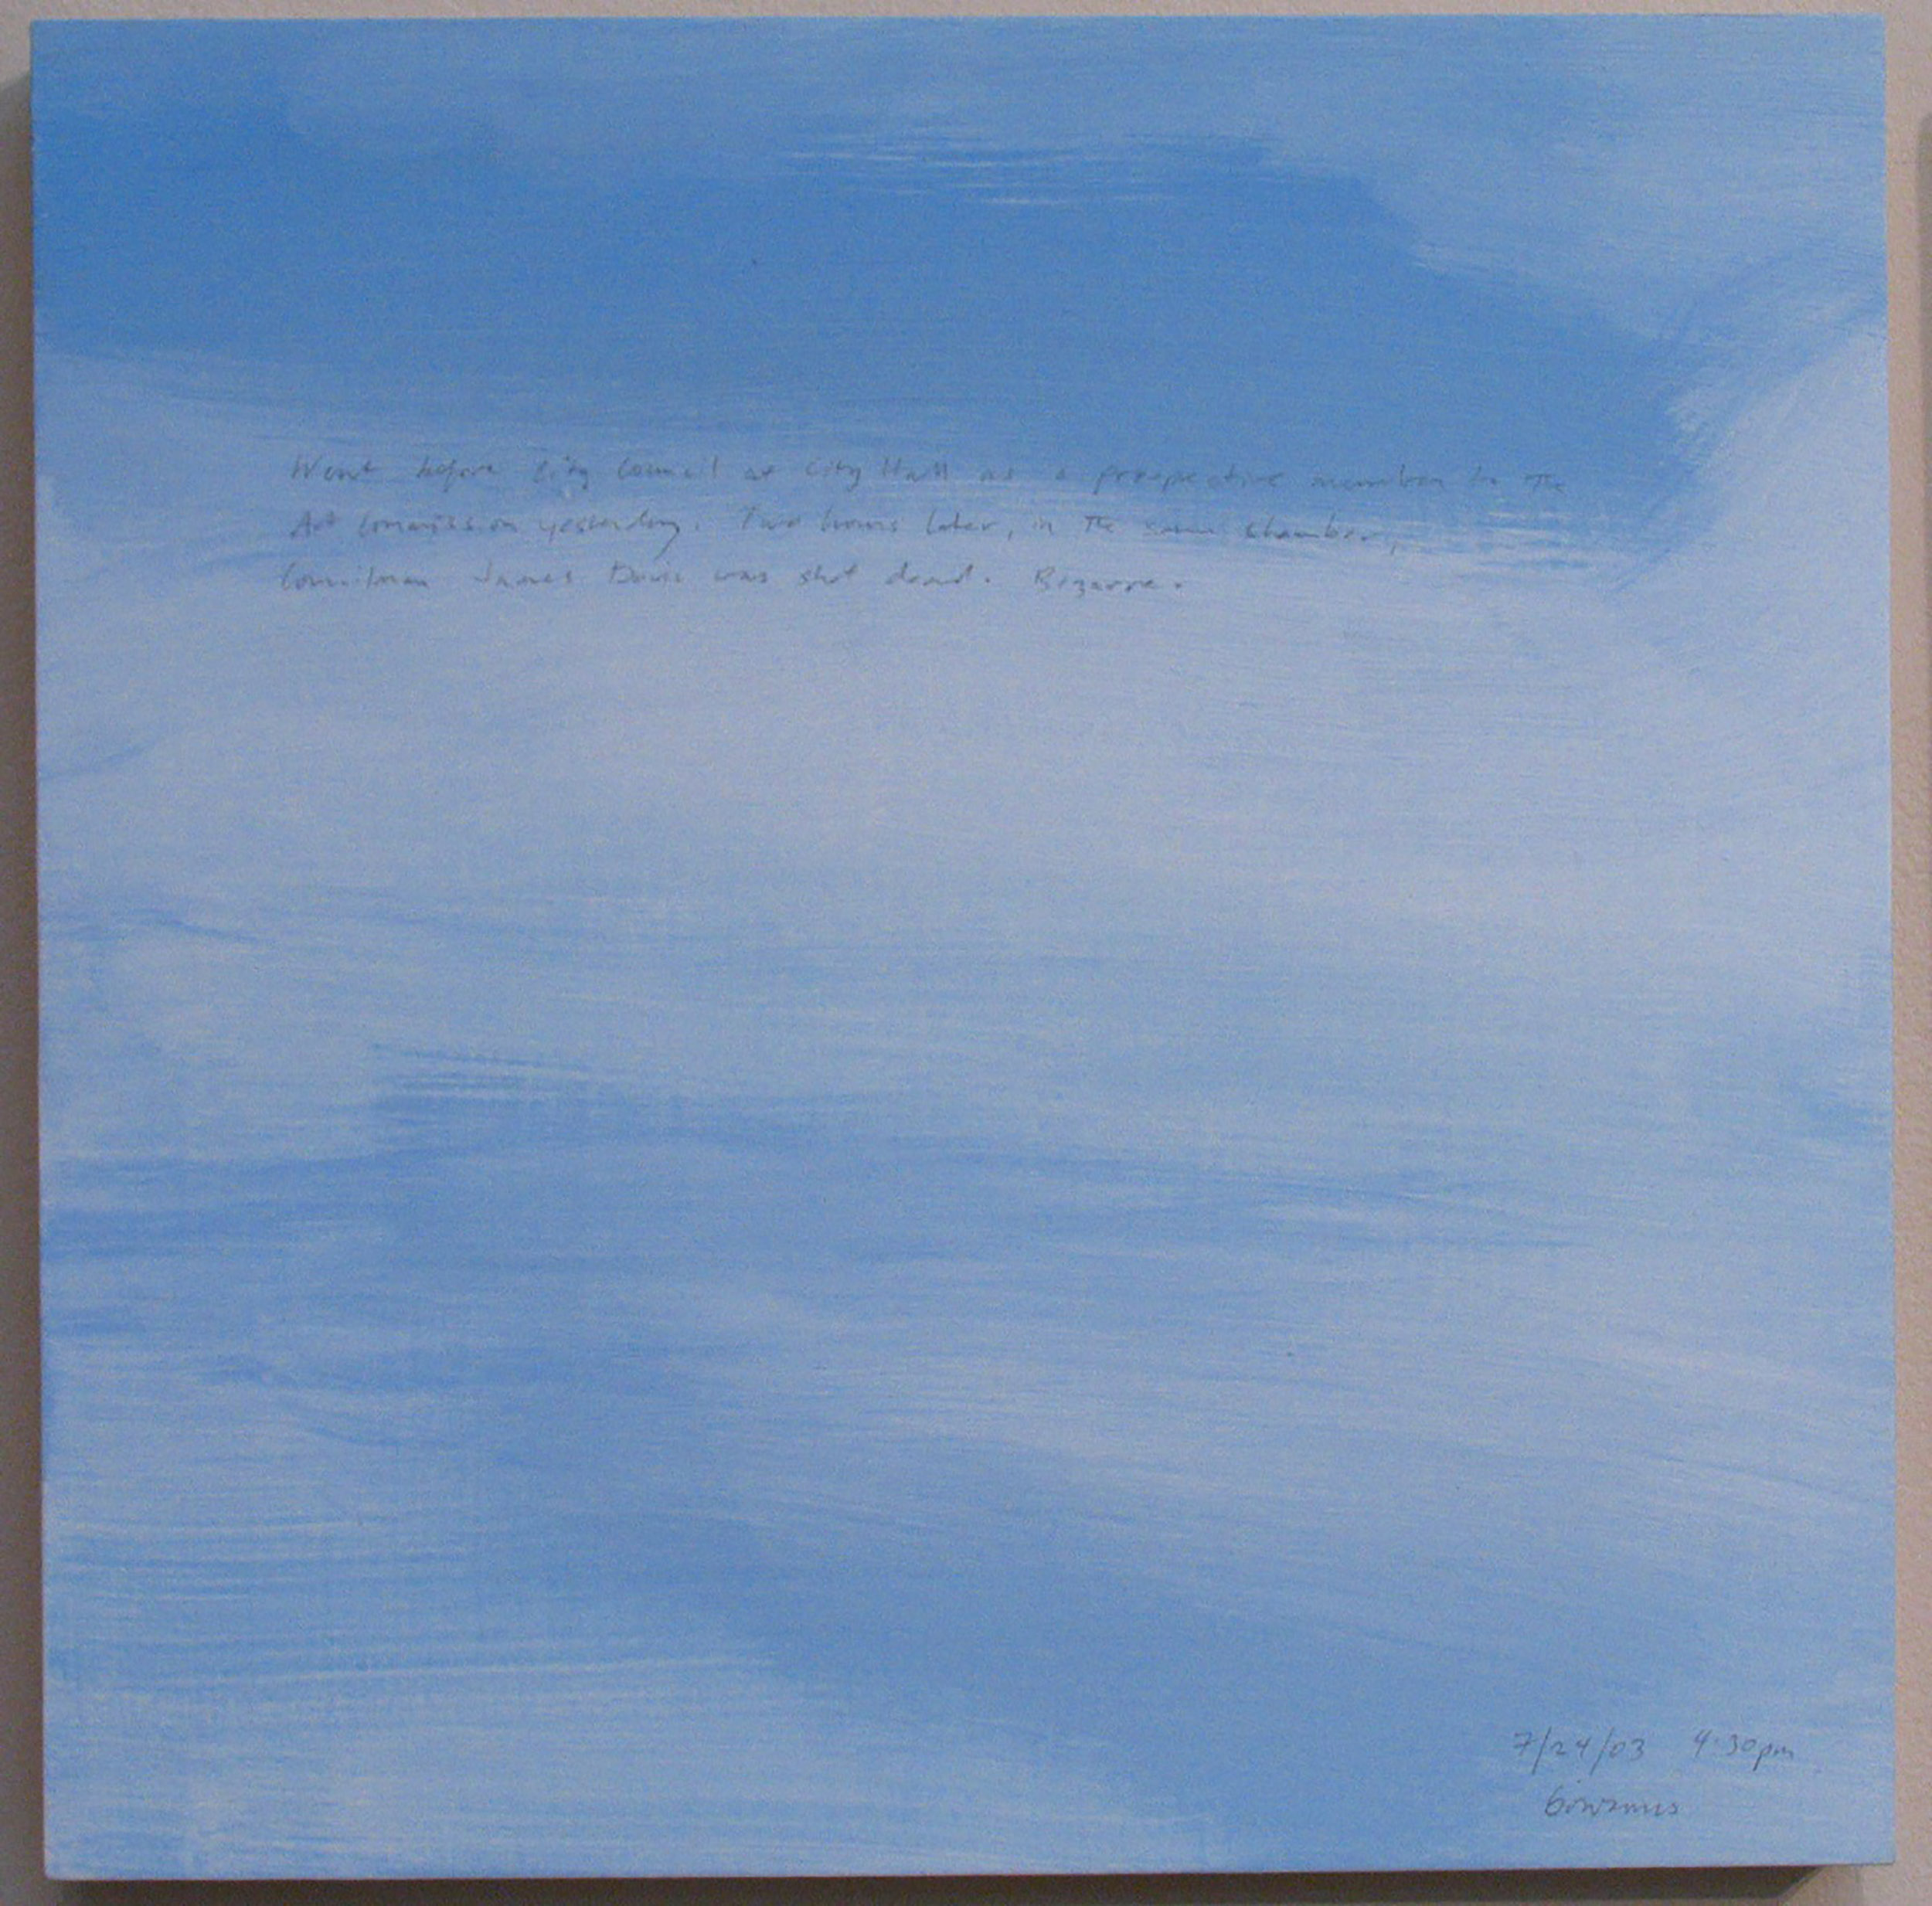 A 14 × 14 inch, acrylic painting of the sky. A journal entry is handwritten on the painting:

“Went before City Council at City Hall as a prospective member to the Art Commission yesterday. Two hours later, in the same chamber, Councilman James Davis was shot dead. Bizarre.  

7/24/03 4:30 pm
Gowanus”